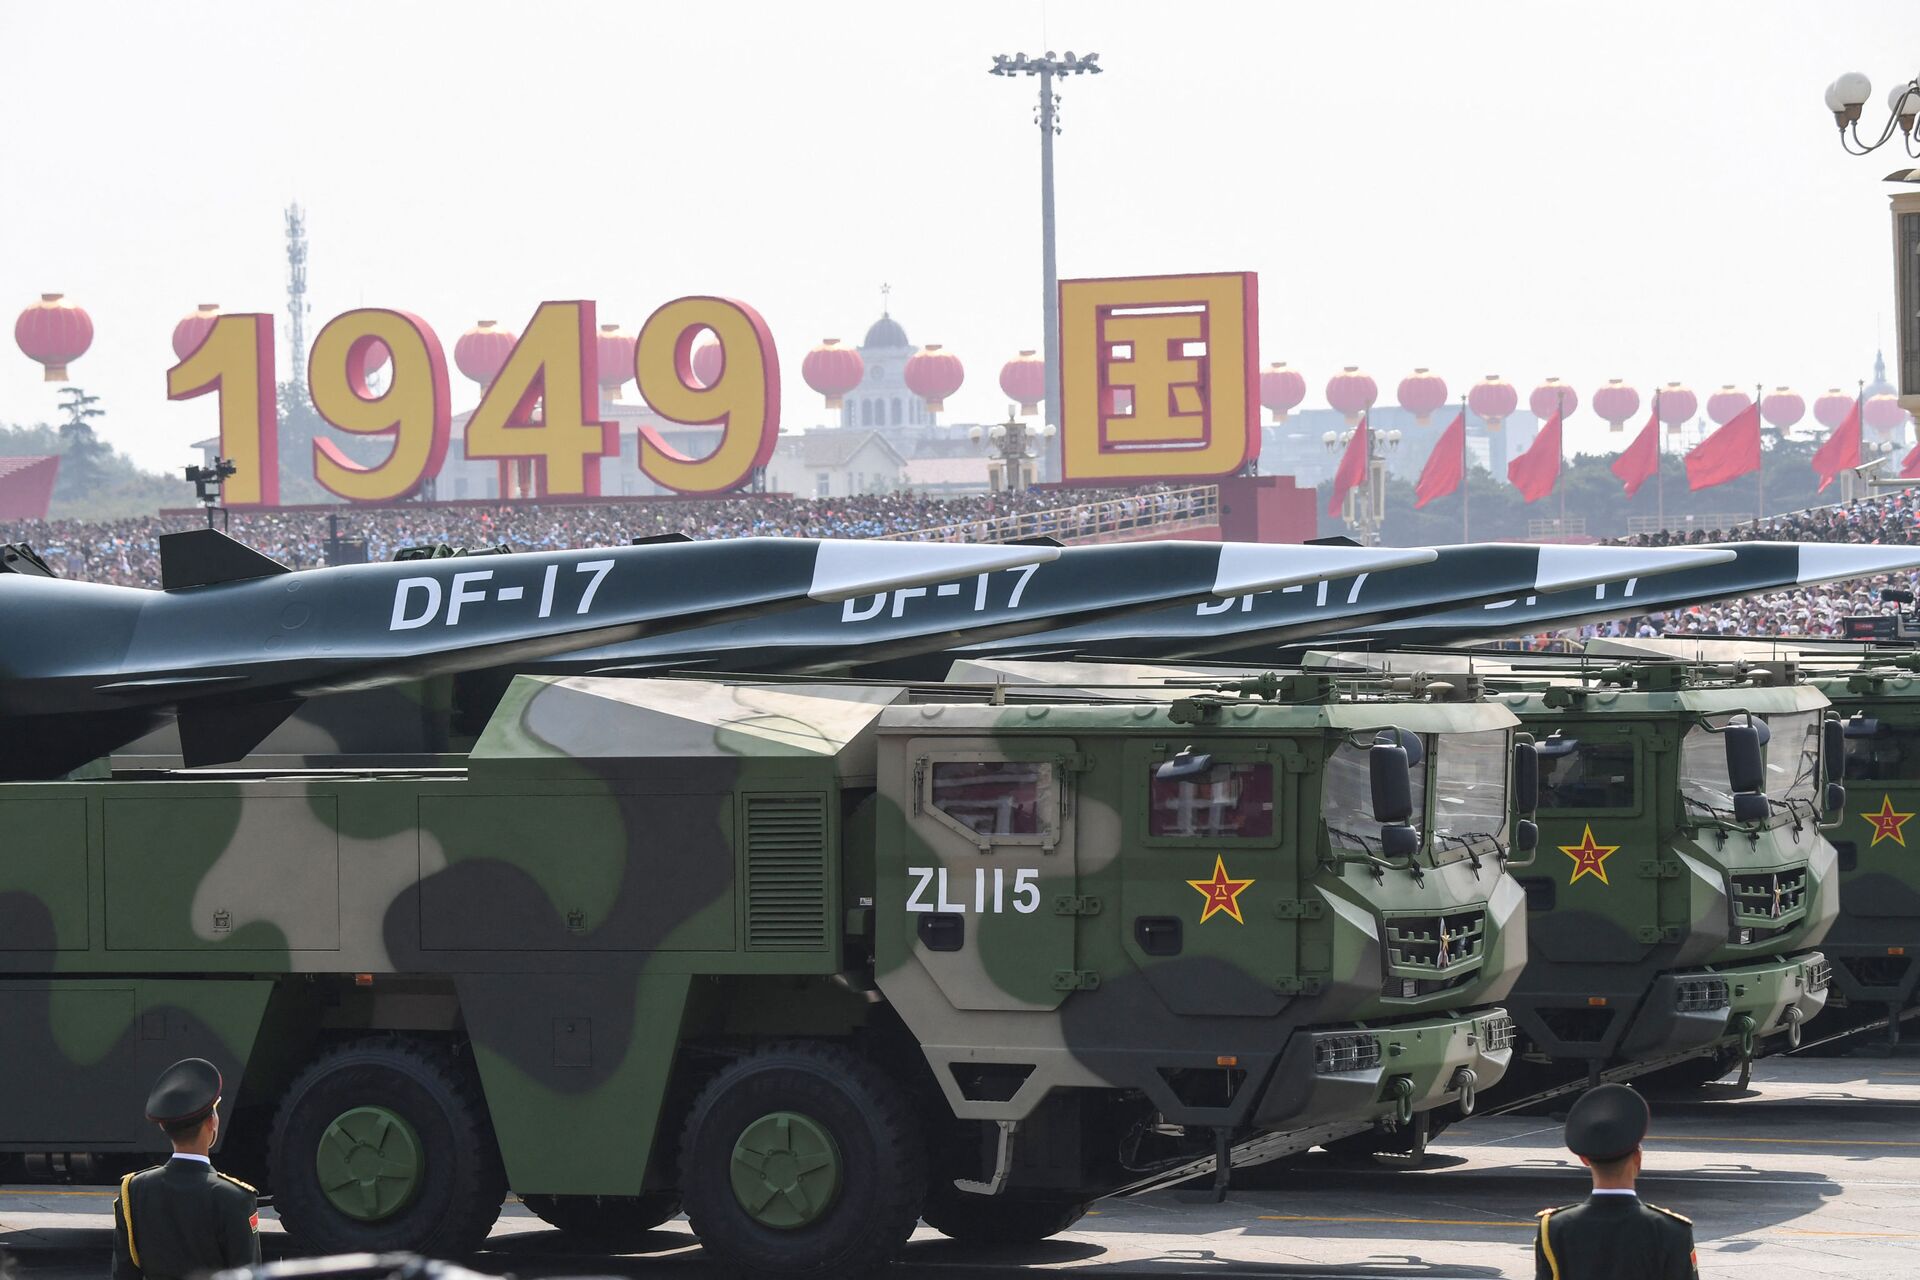 Military vehicles carrying DF-17 missiles participate in a military parade at Tiananmen Square in Beijing on October 1, 2019, to mark the 70th anniversary of the founding of the People’s Republic of China - Sputnik International, 1920, 17.11.2021